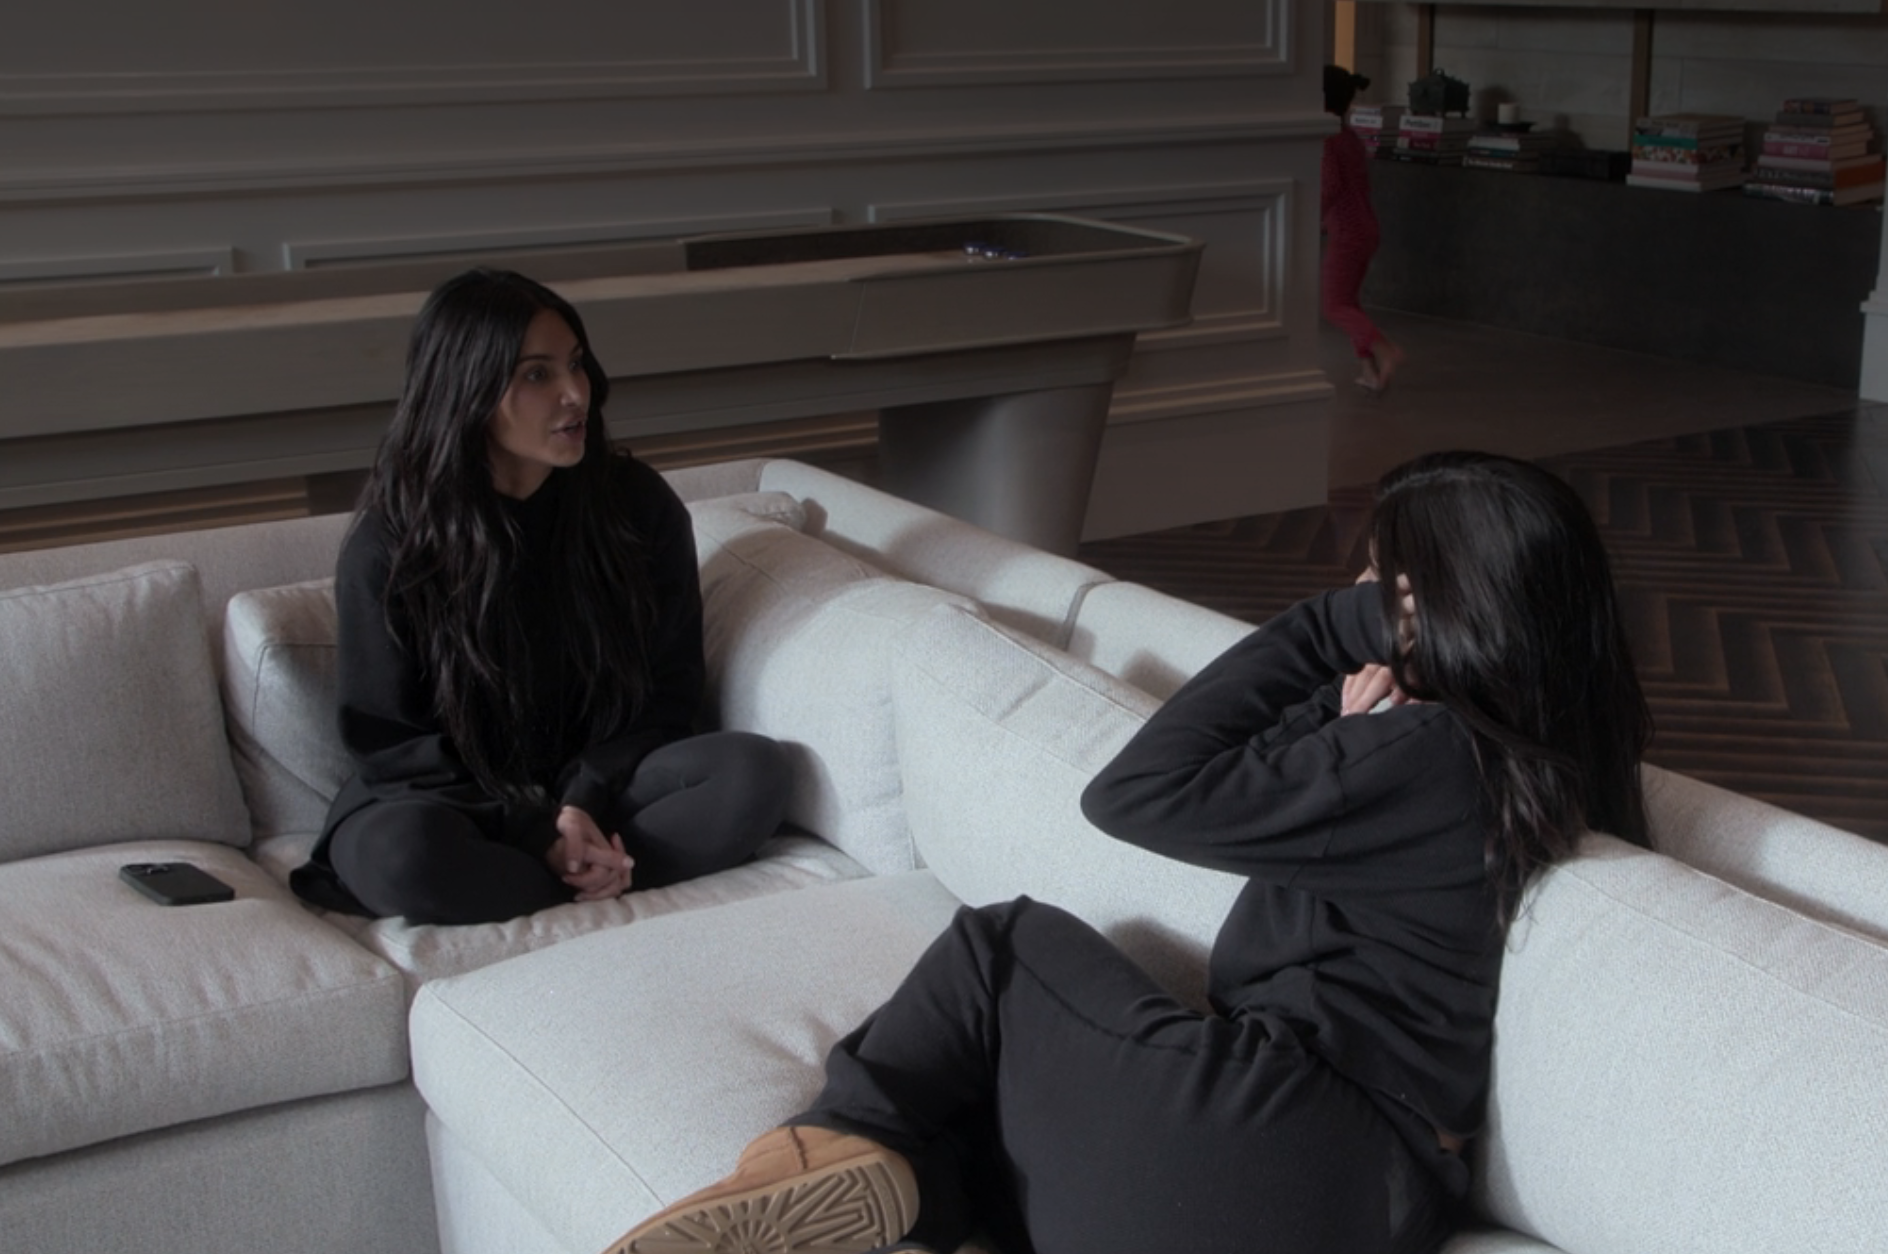 Kim and Kylie sitting on a couch